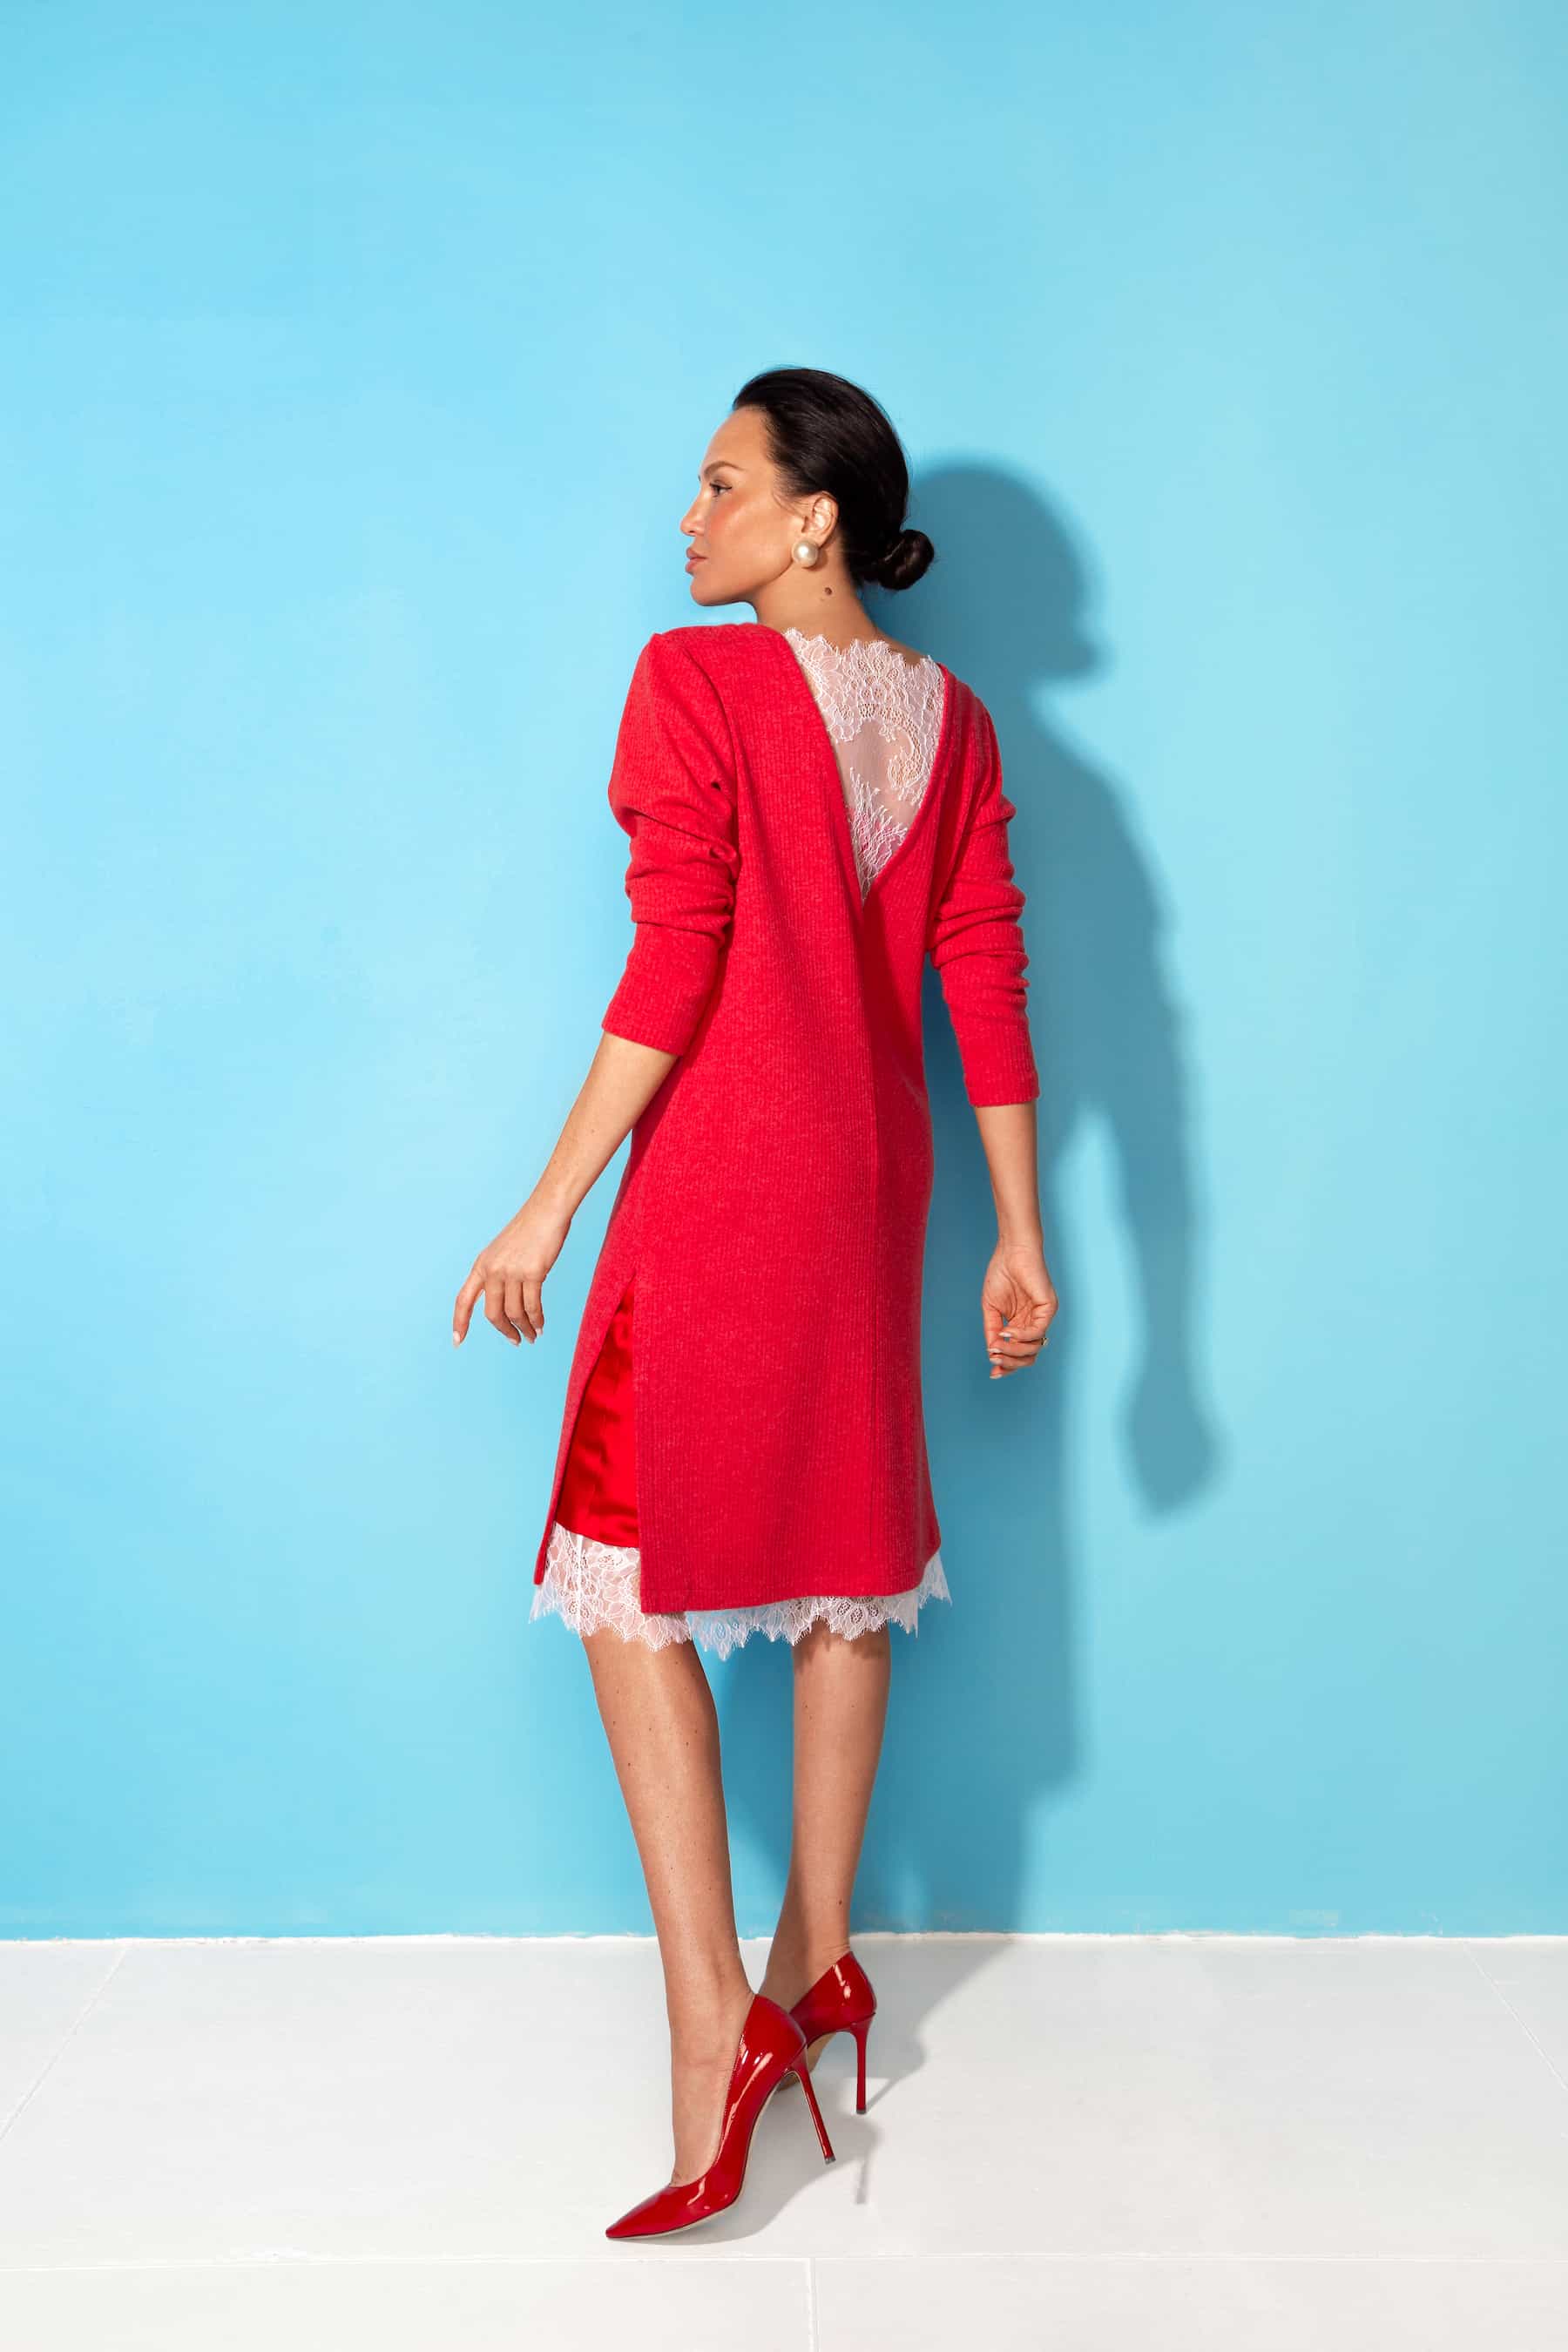 Red tunic dress with white lace